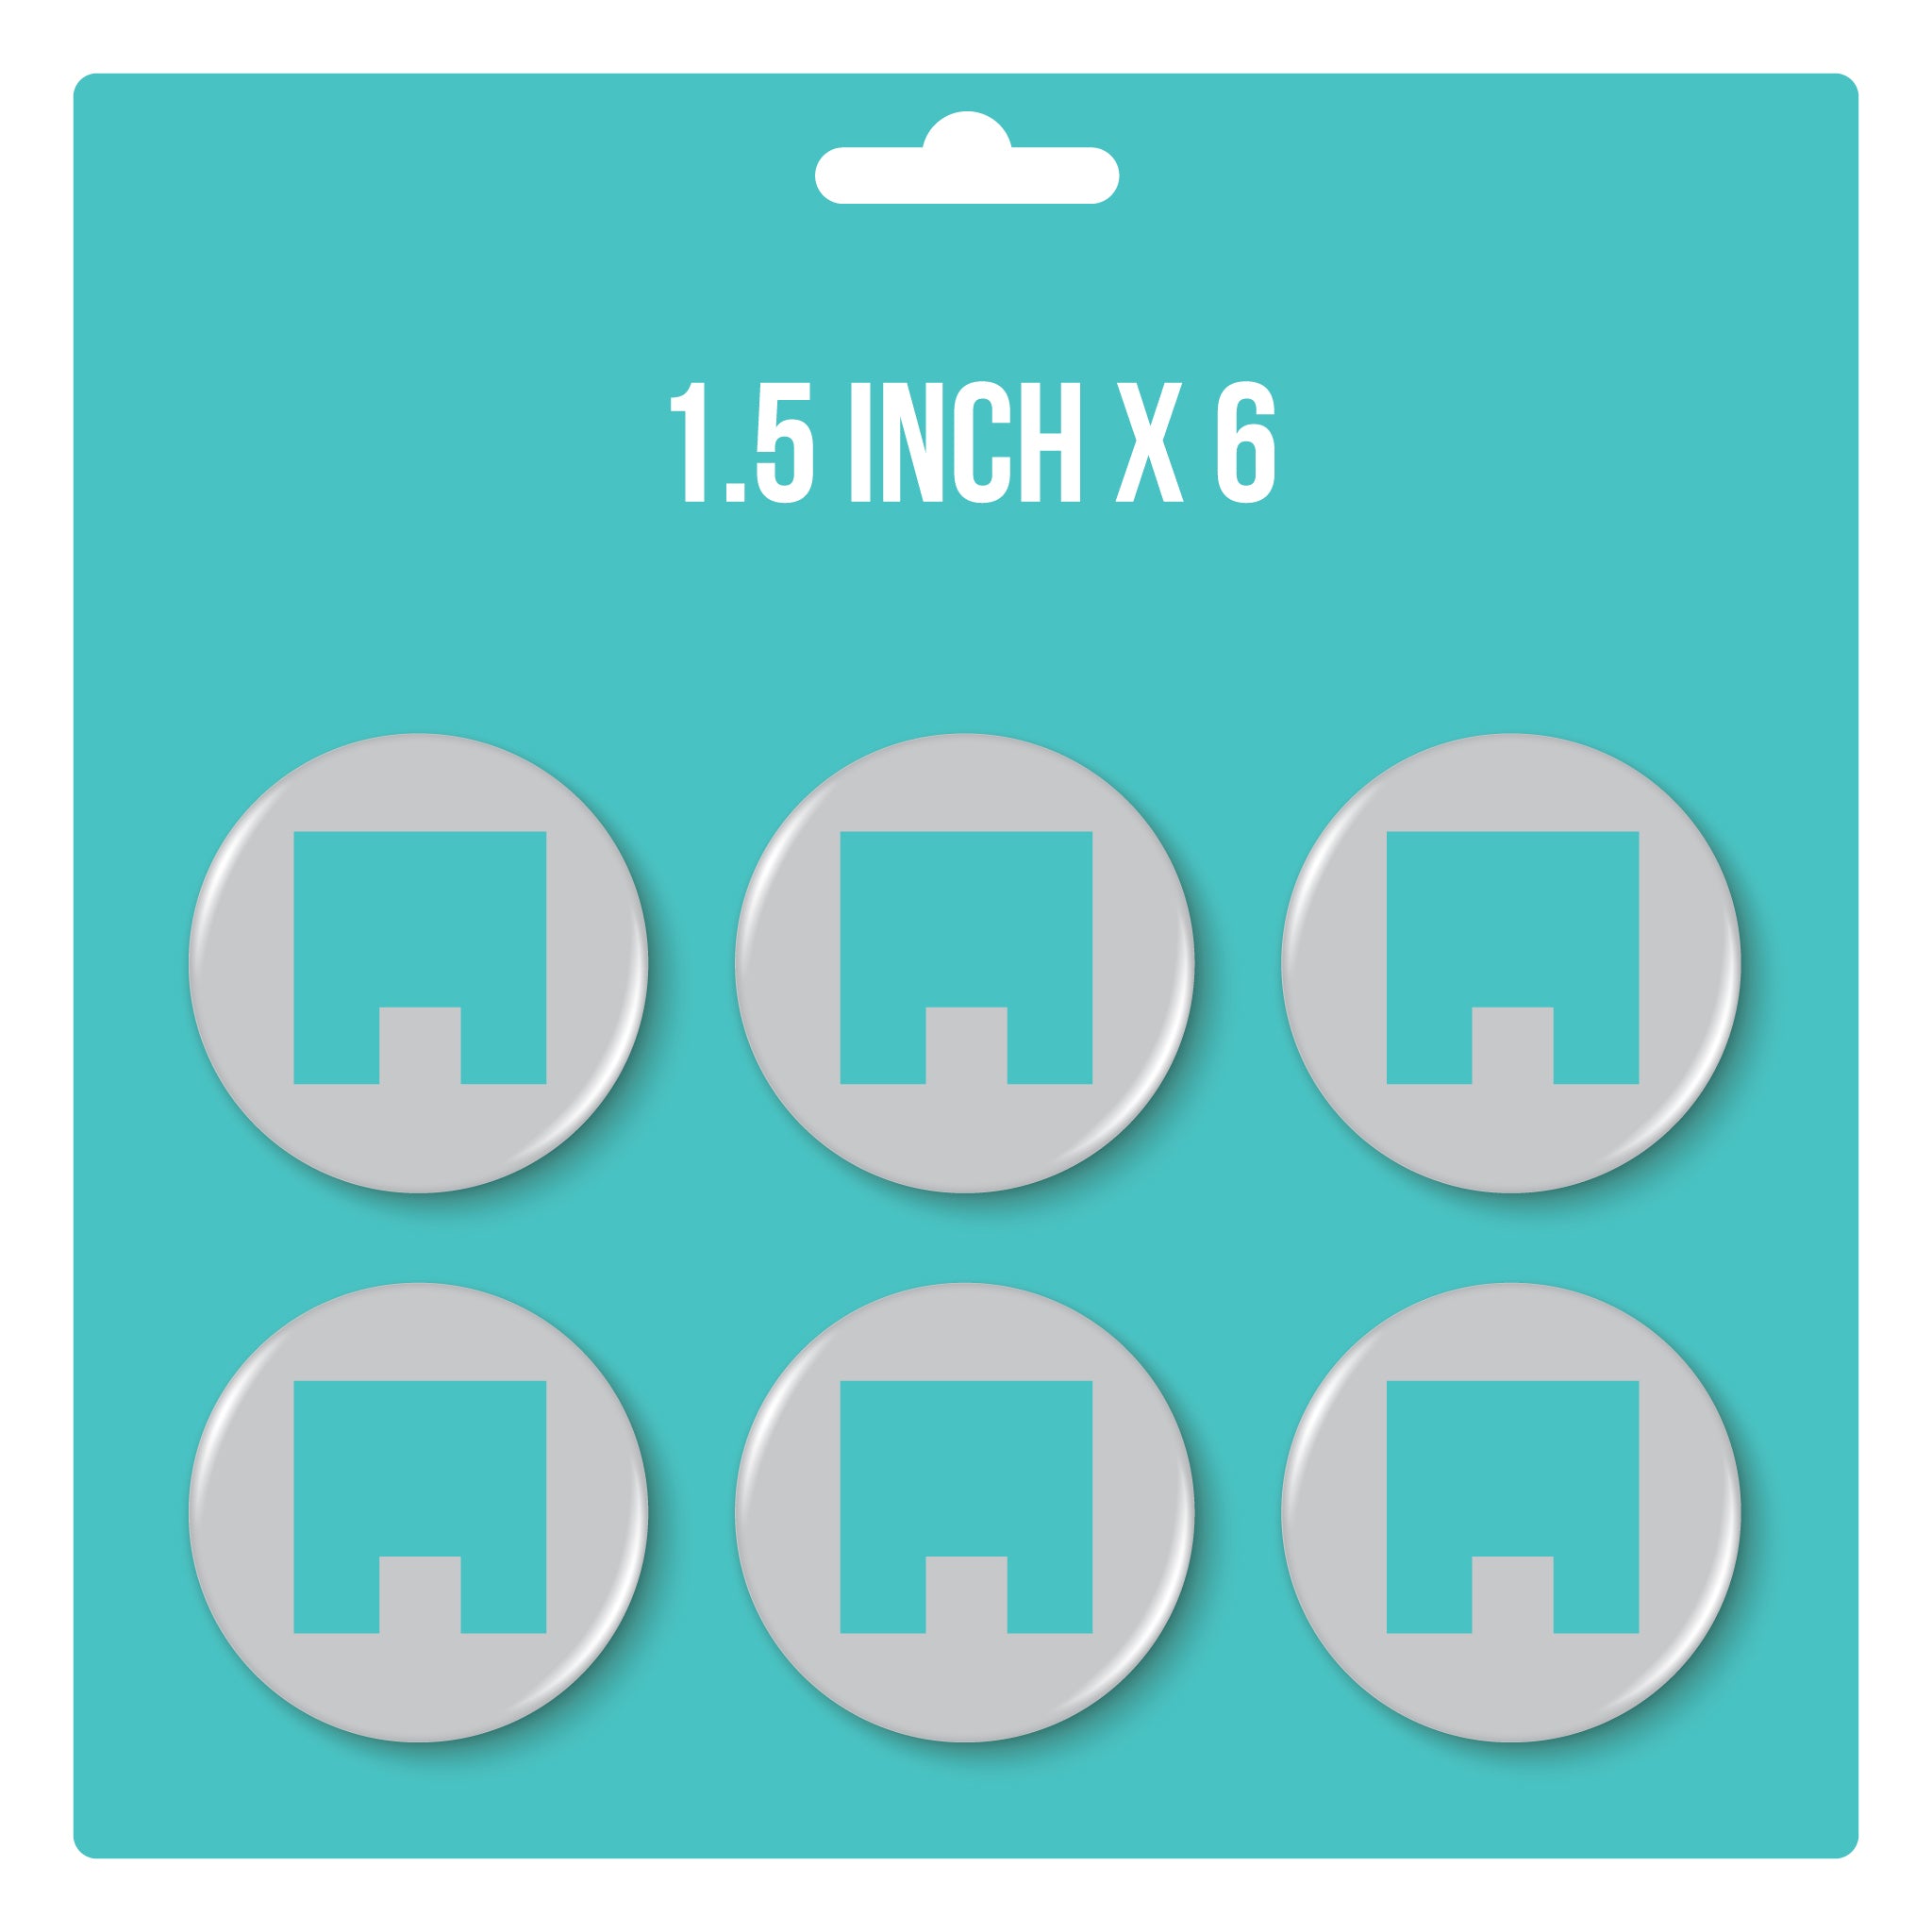 1.5" x 6 Button Pack